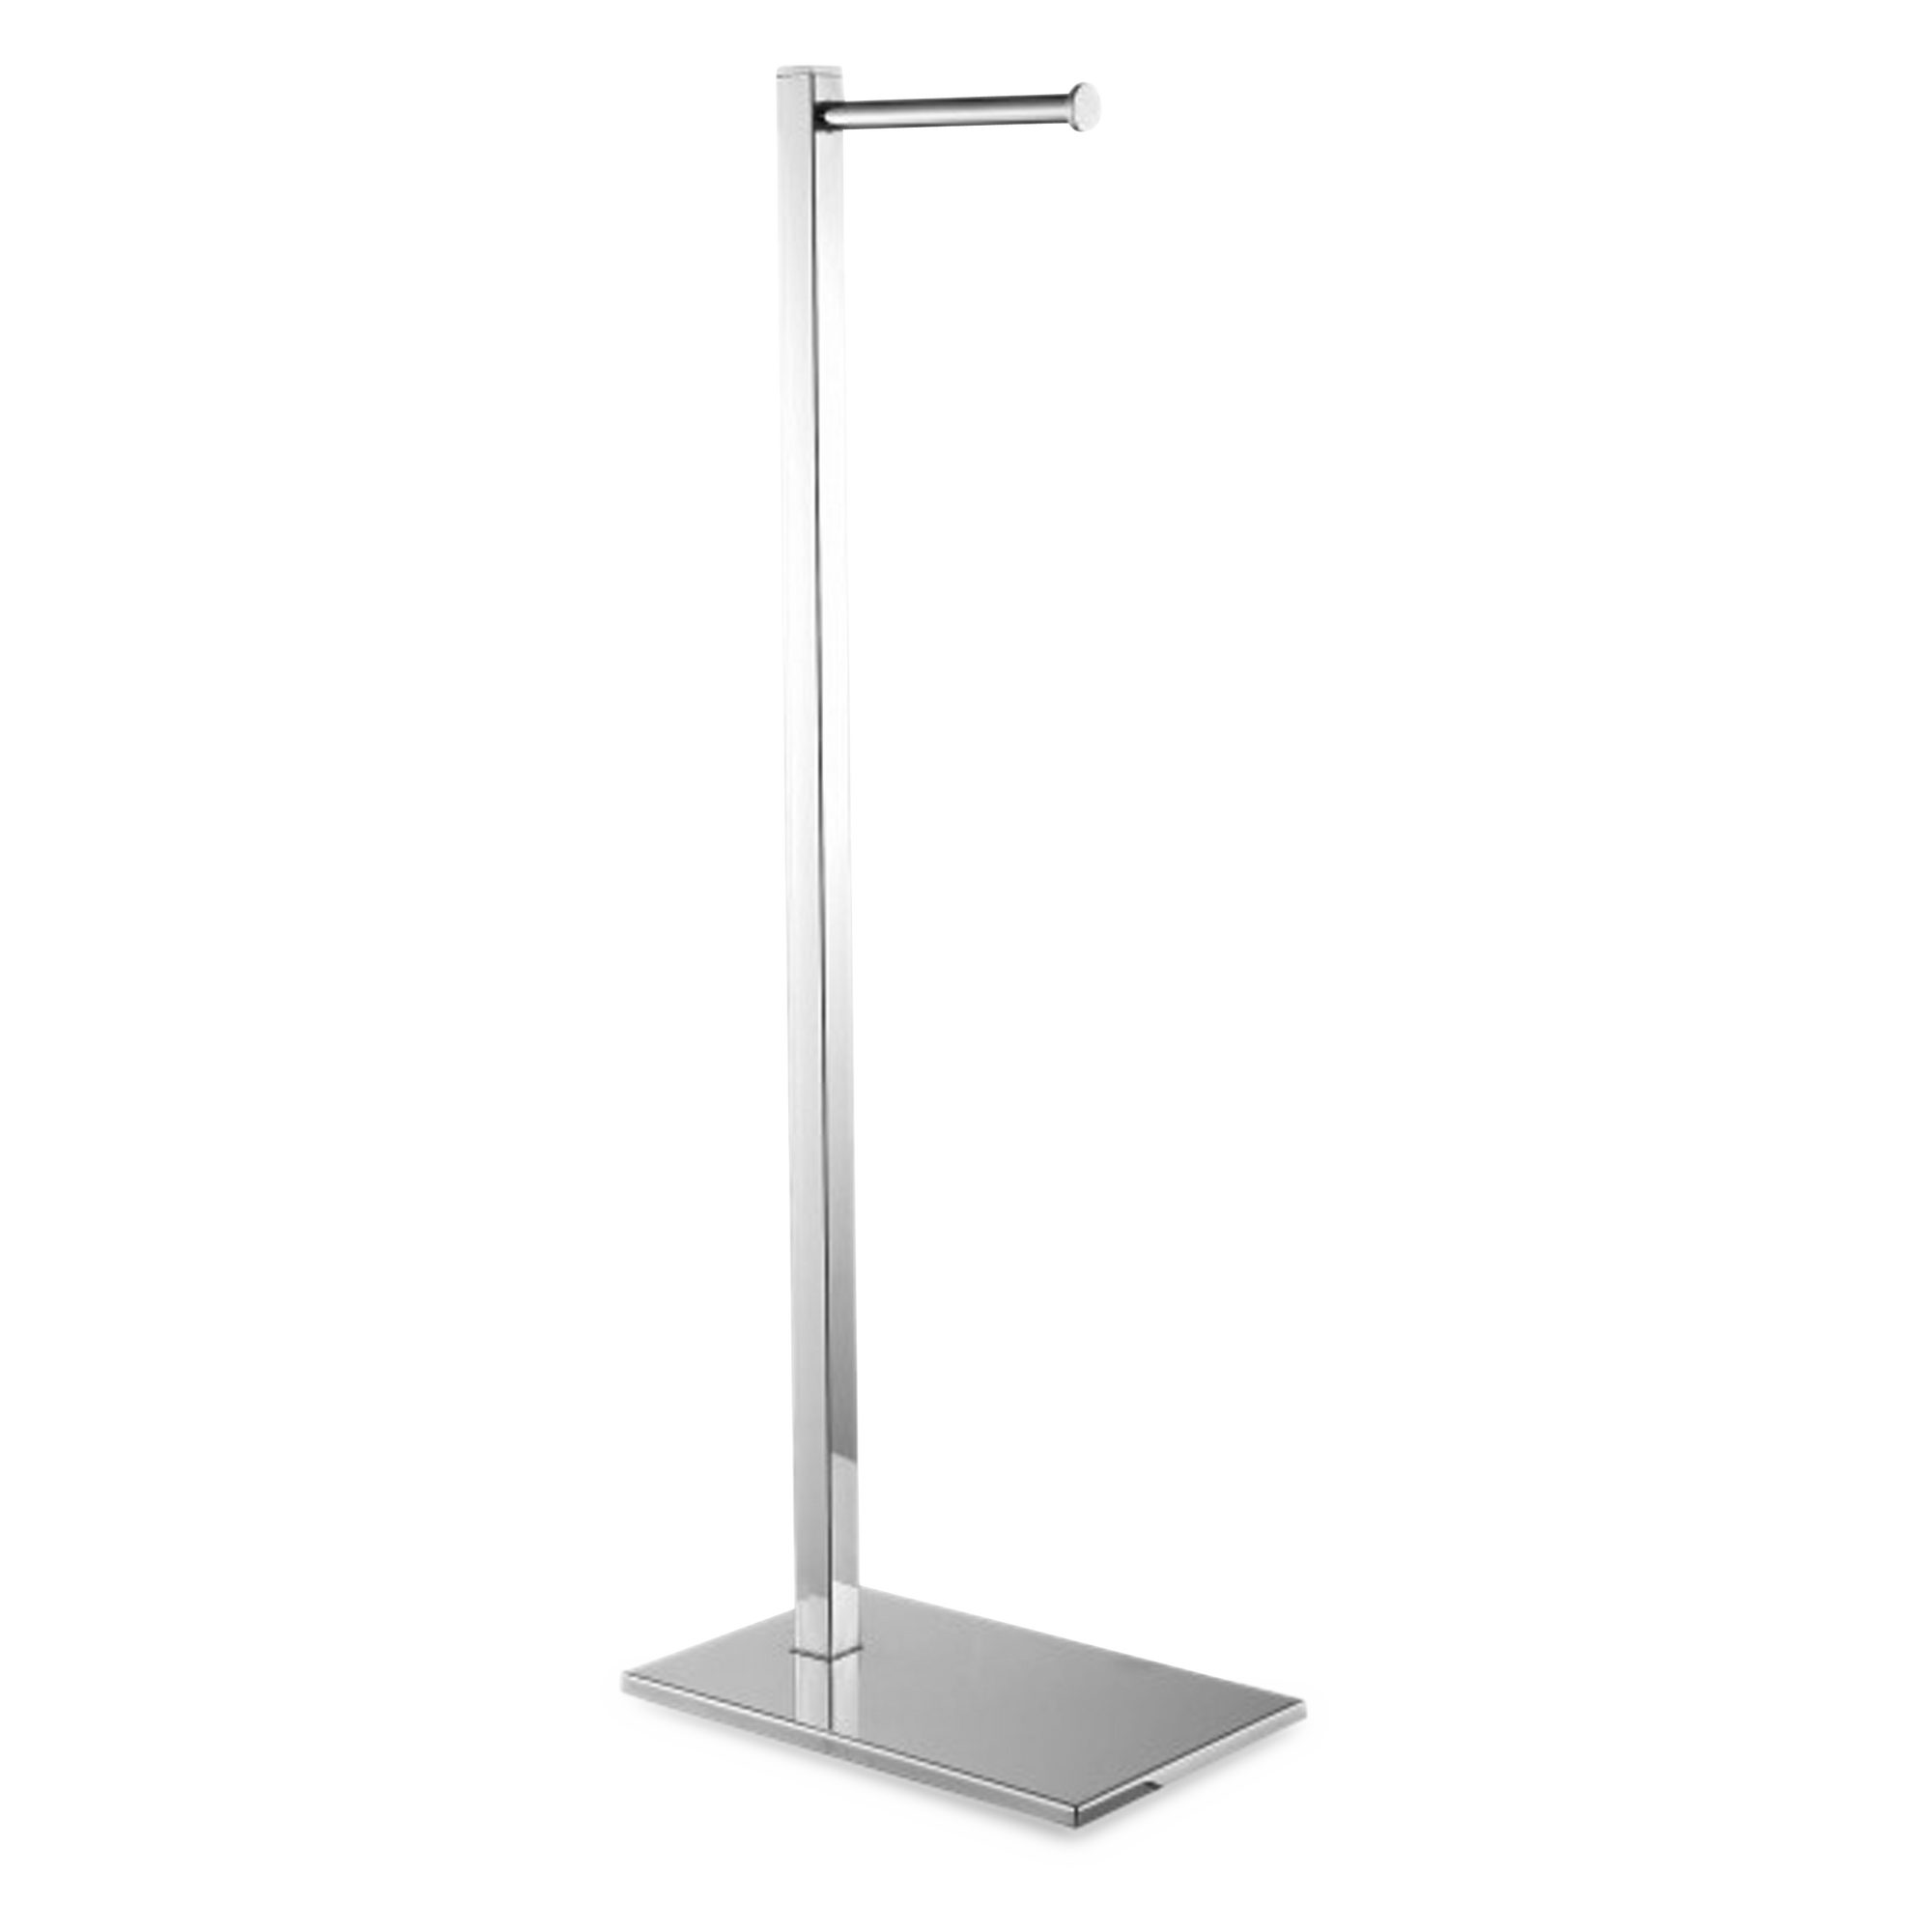 A freestanding toilet paper holder in a chrome finish.